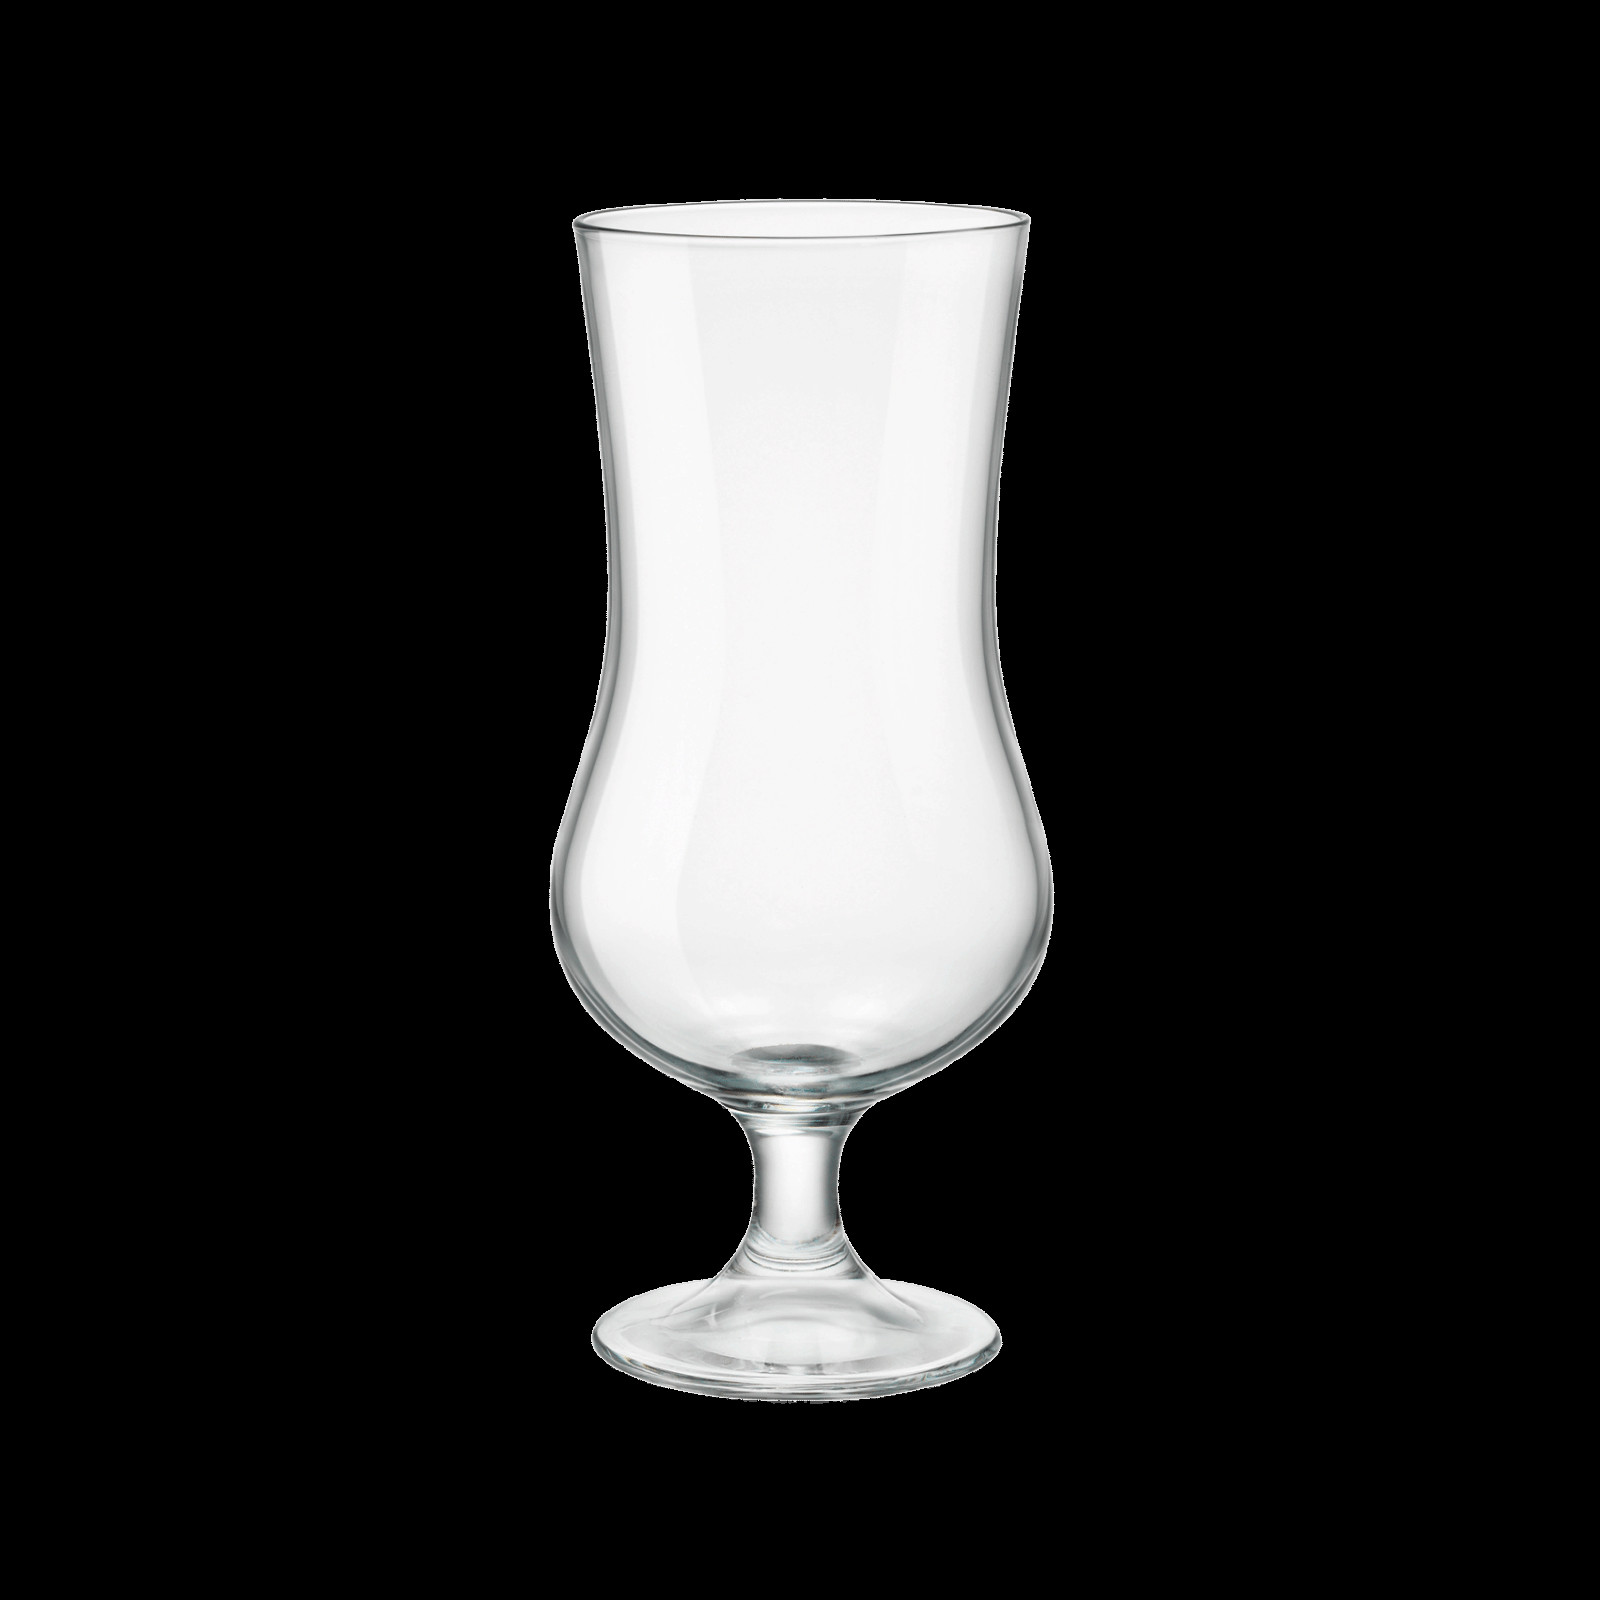 12 Trendy 3 Foot Tall Vases 2024 free download 3 foot tall vases of archivi products bormioli rocco for small beer glass